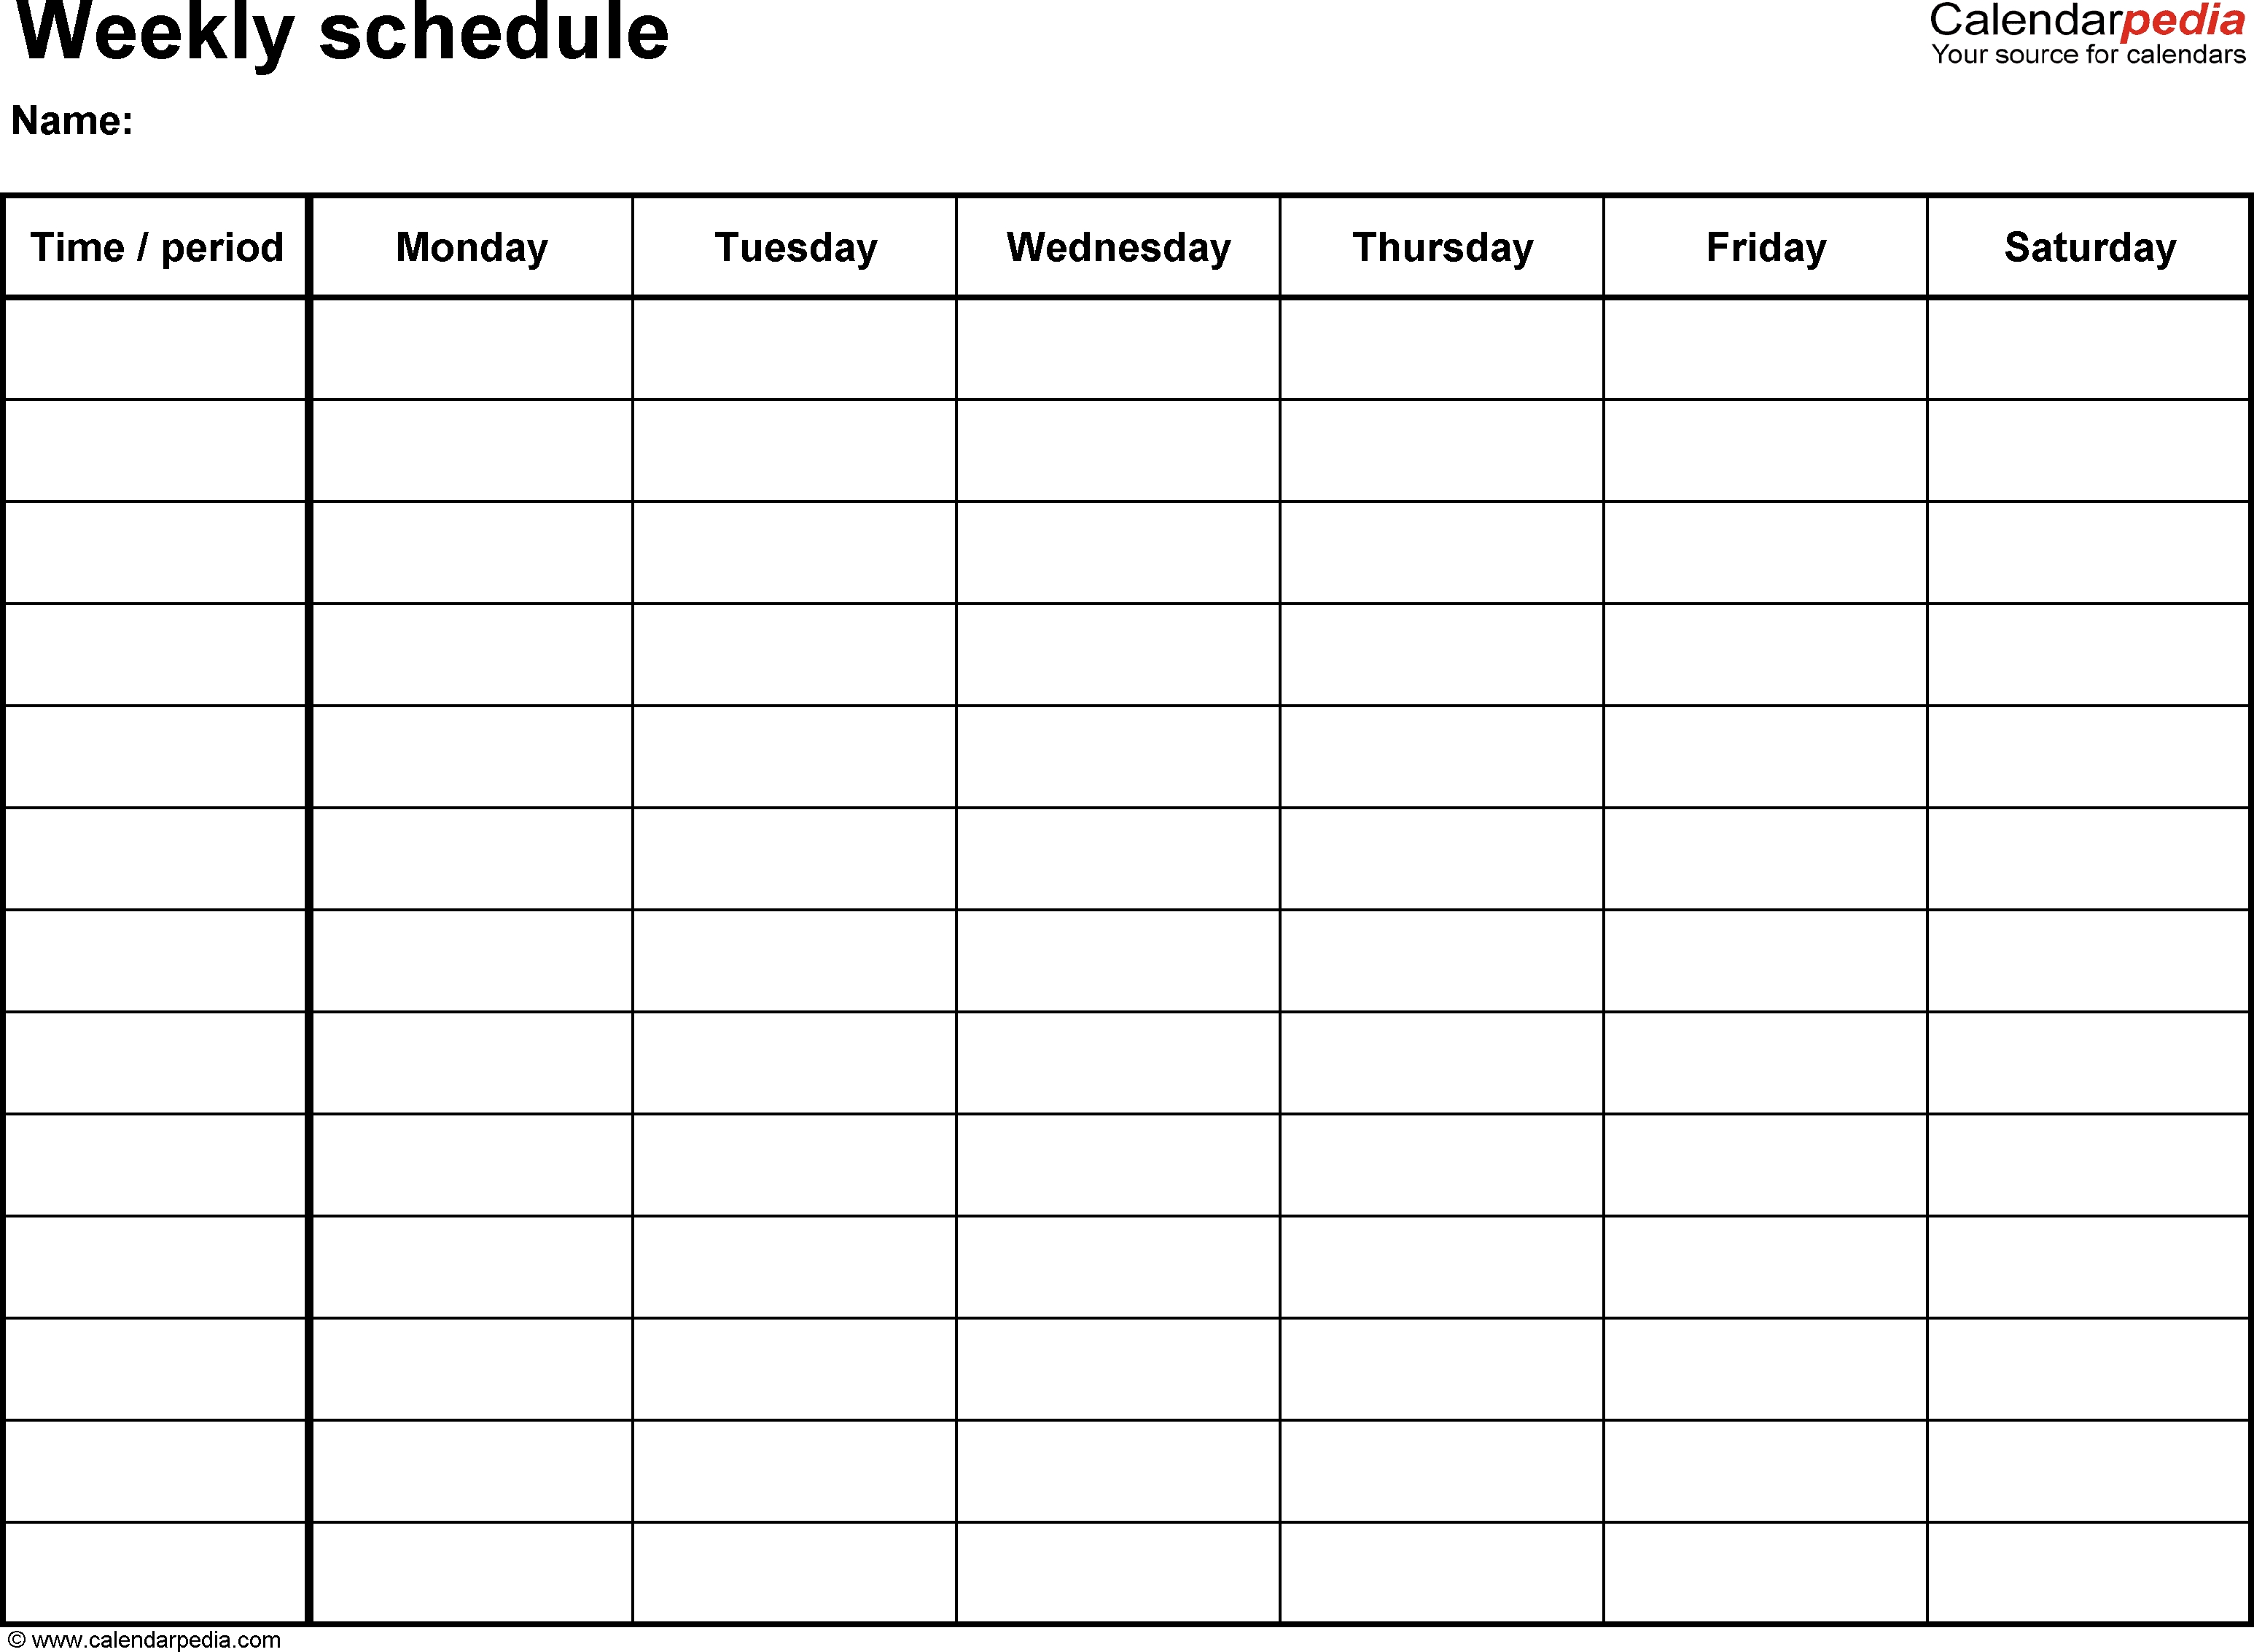 Free Weekly Schedule Templates For Pdf - 18 Templates with regard to Free Printable Weekly Schedule Template